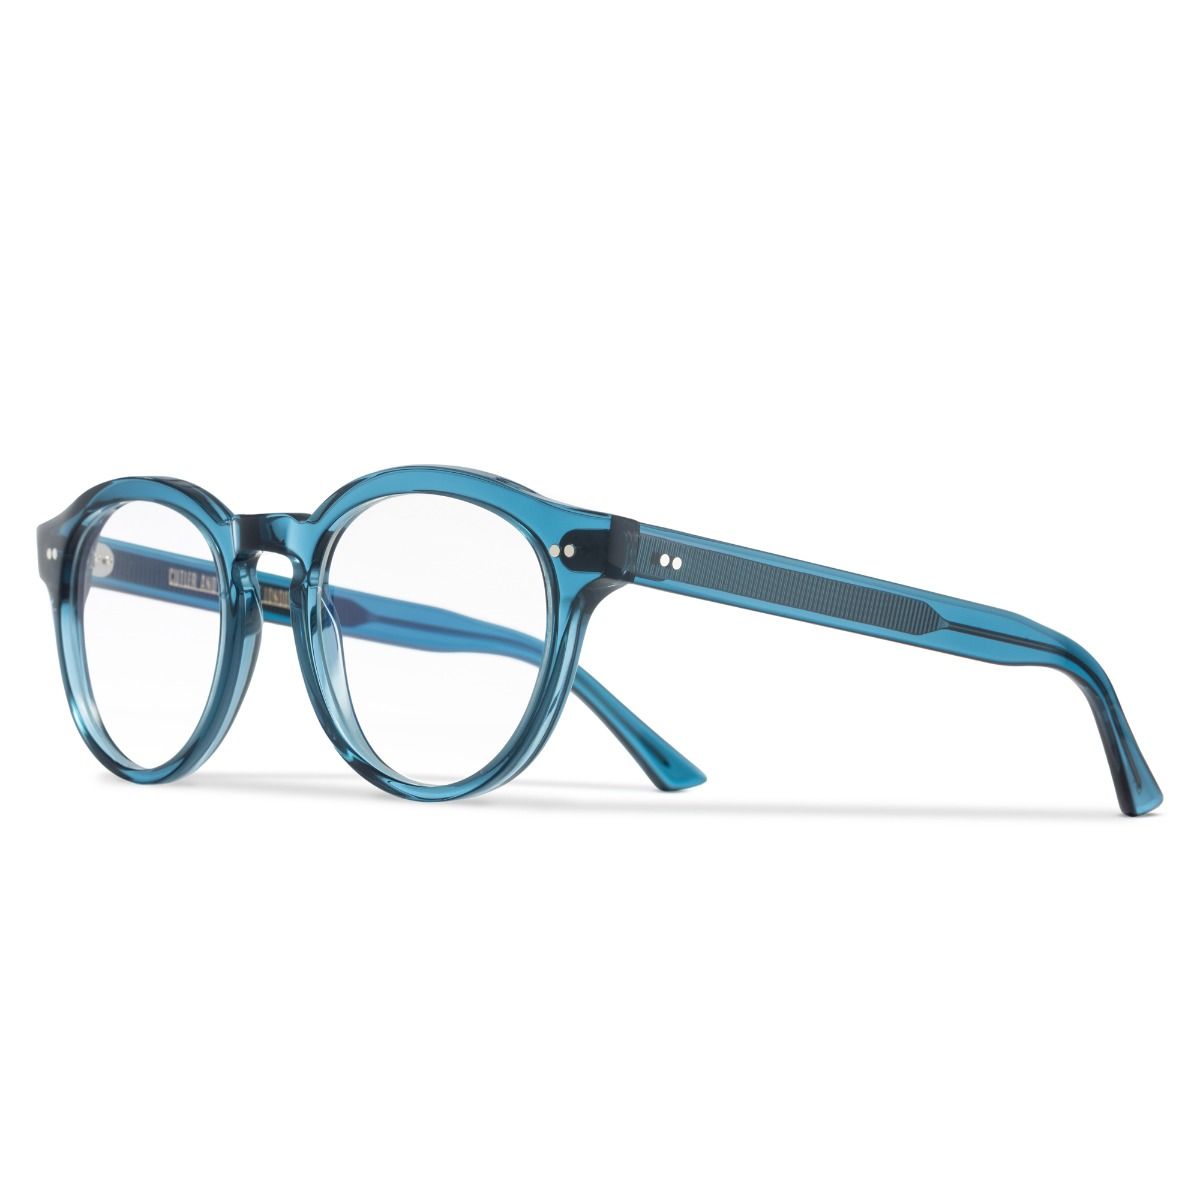 Cutler and Gross, 1378 Optical Round Glasses - Deep Teal